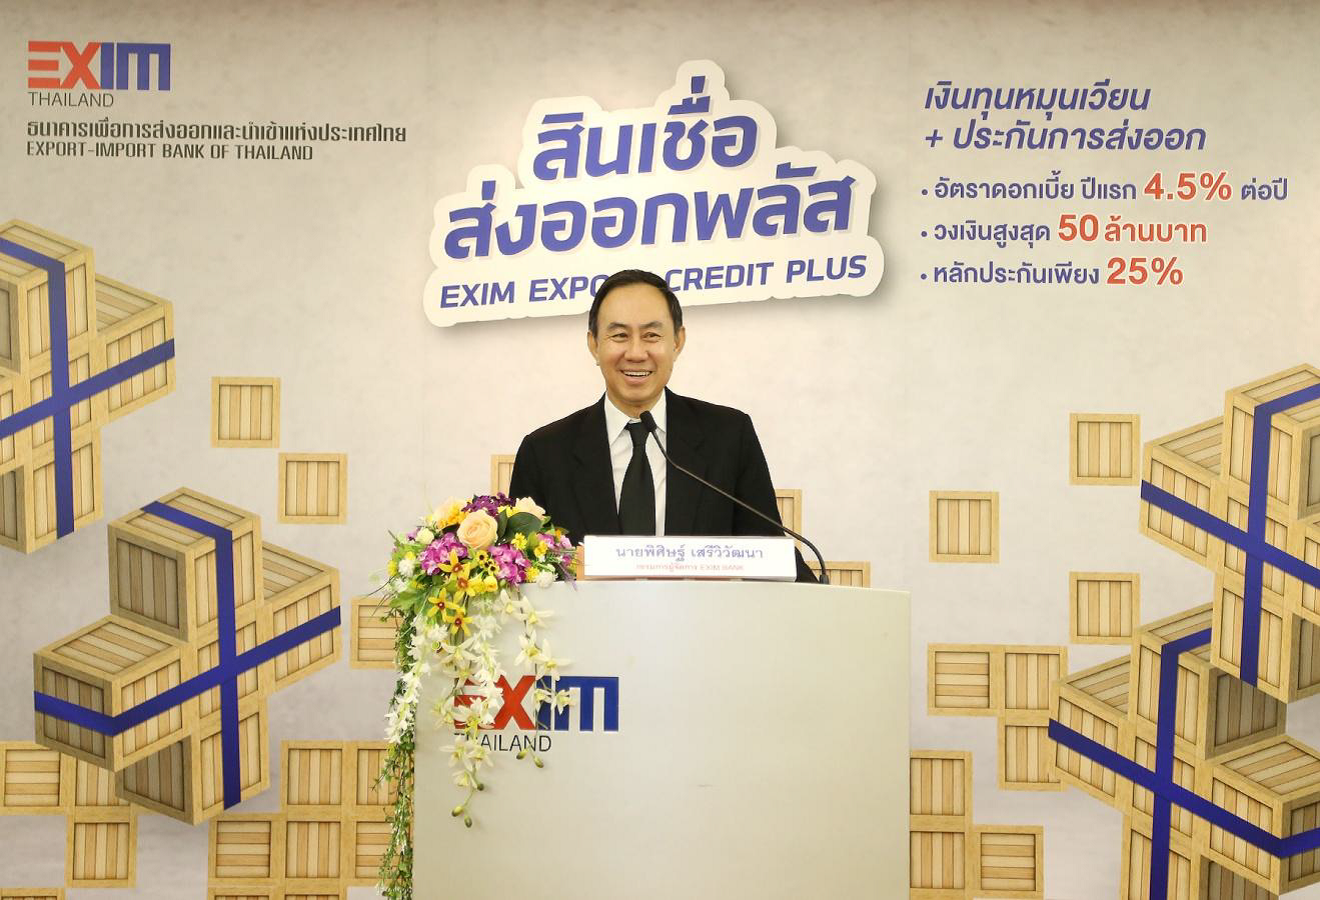 EXIM Thailand Launches New Credit Facility “Export Credit Plus” to Assist SMEs Pioneering New Markets and Boosting Thai Export Growth in 2017